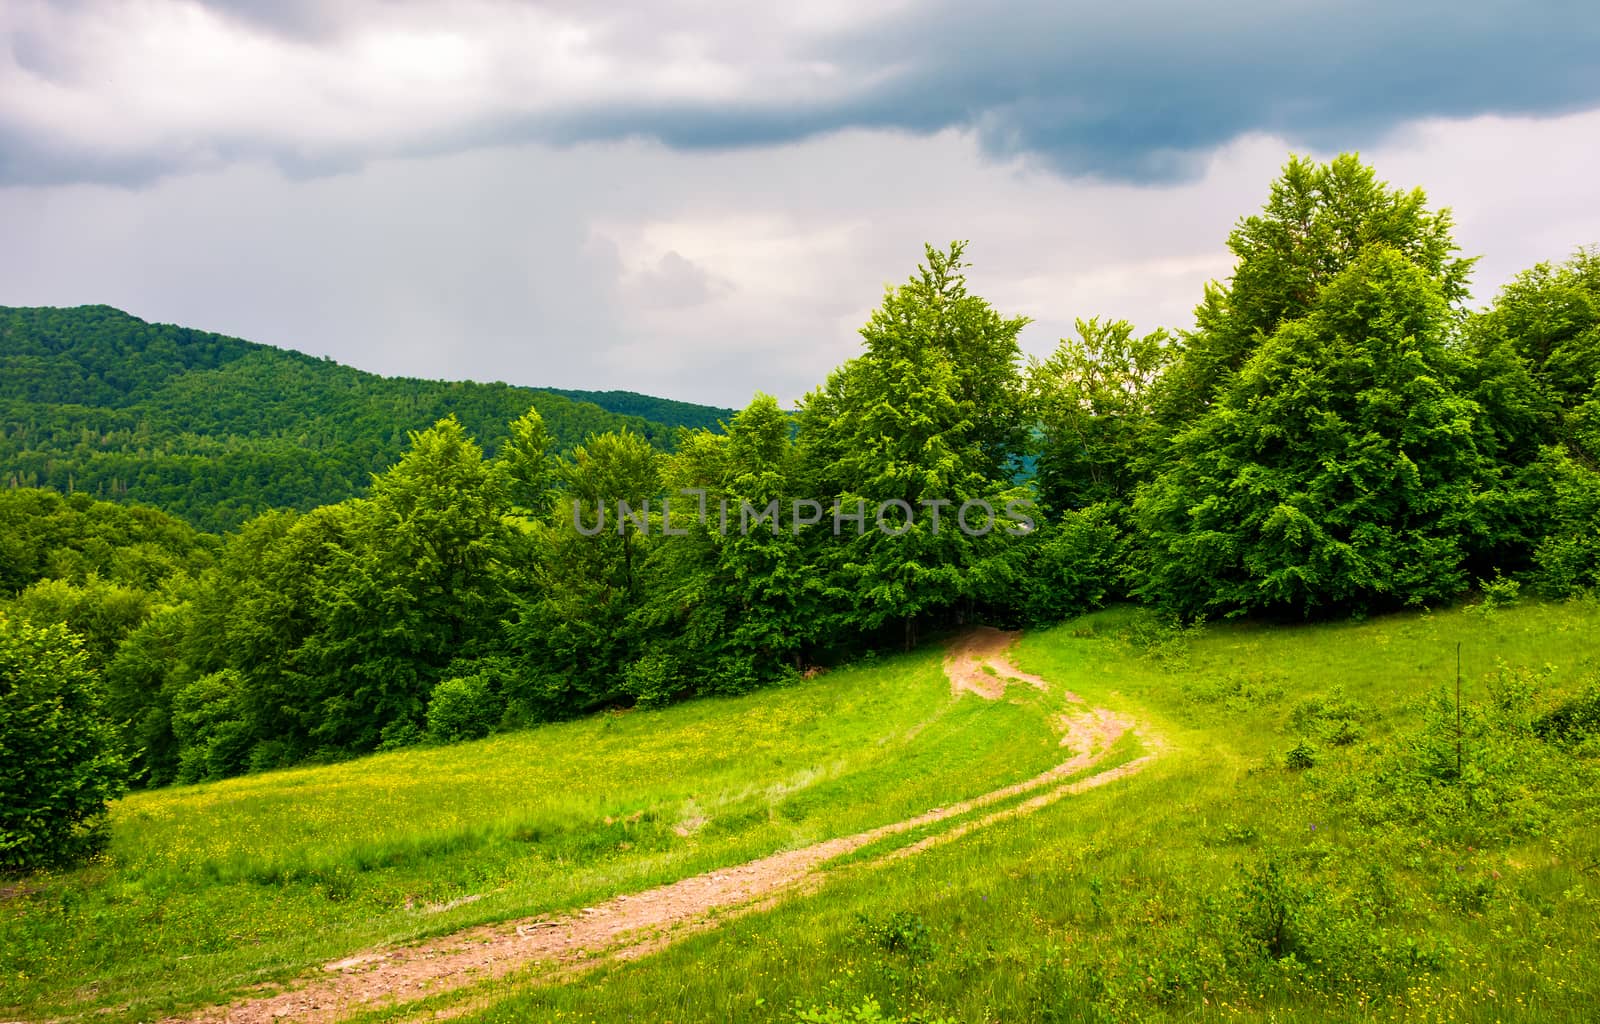 country road hides in the woods. lovely countryside scenery in mountains